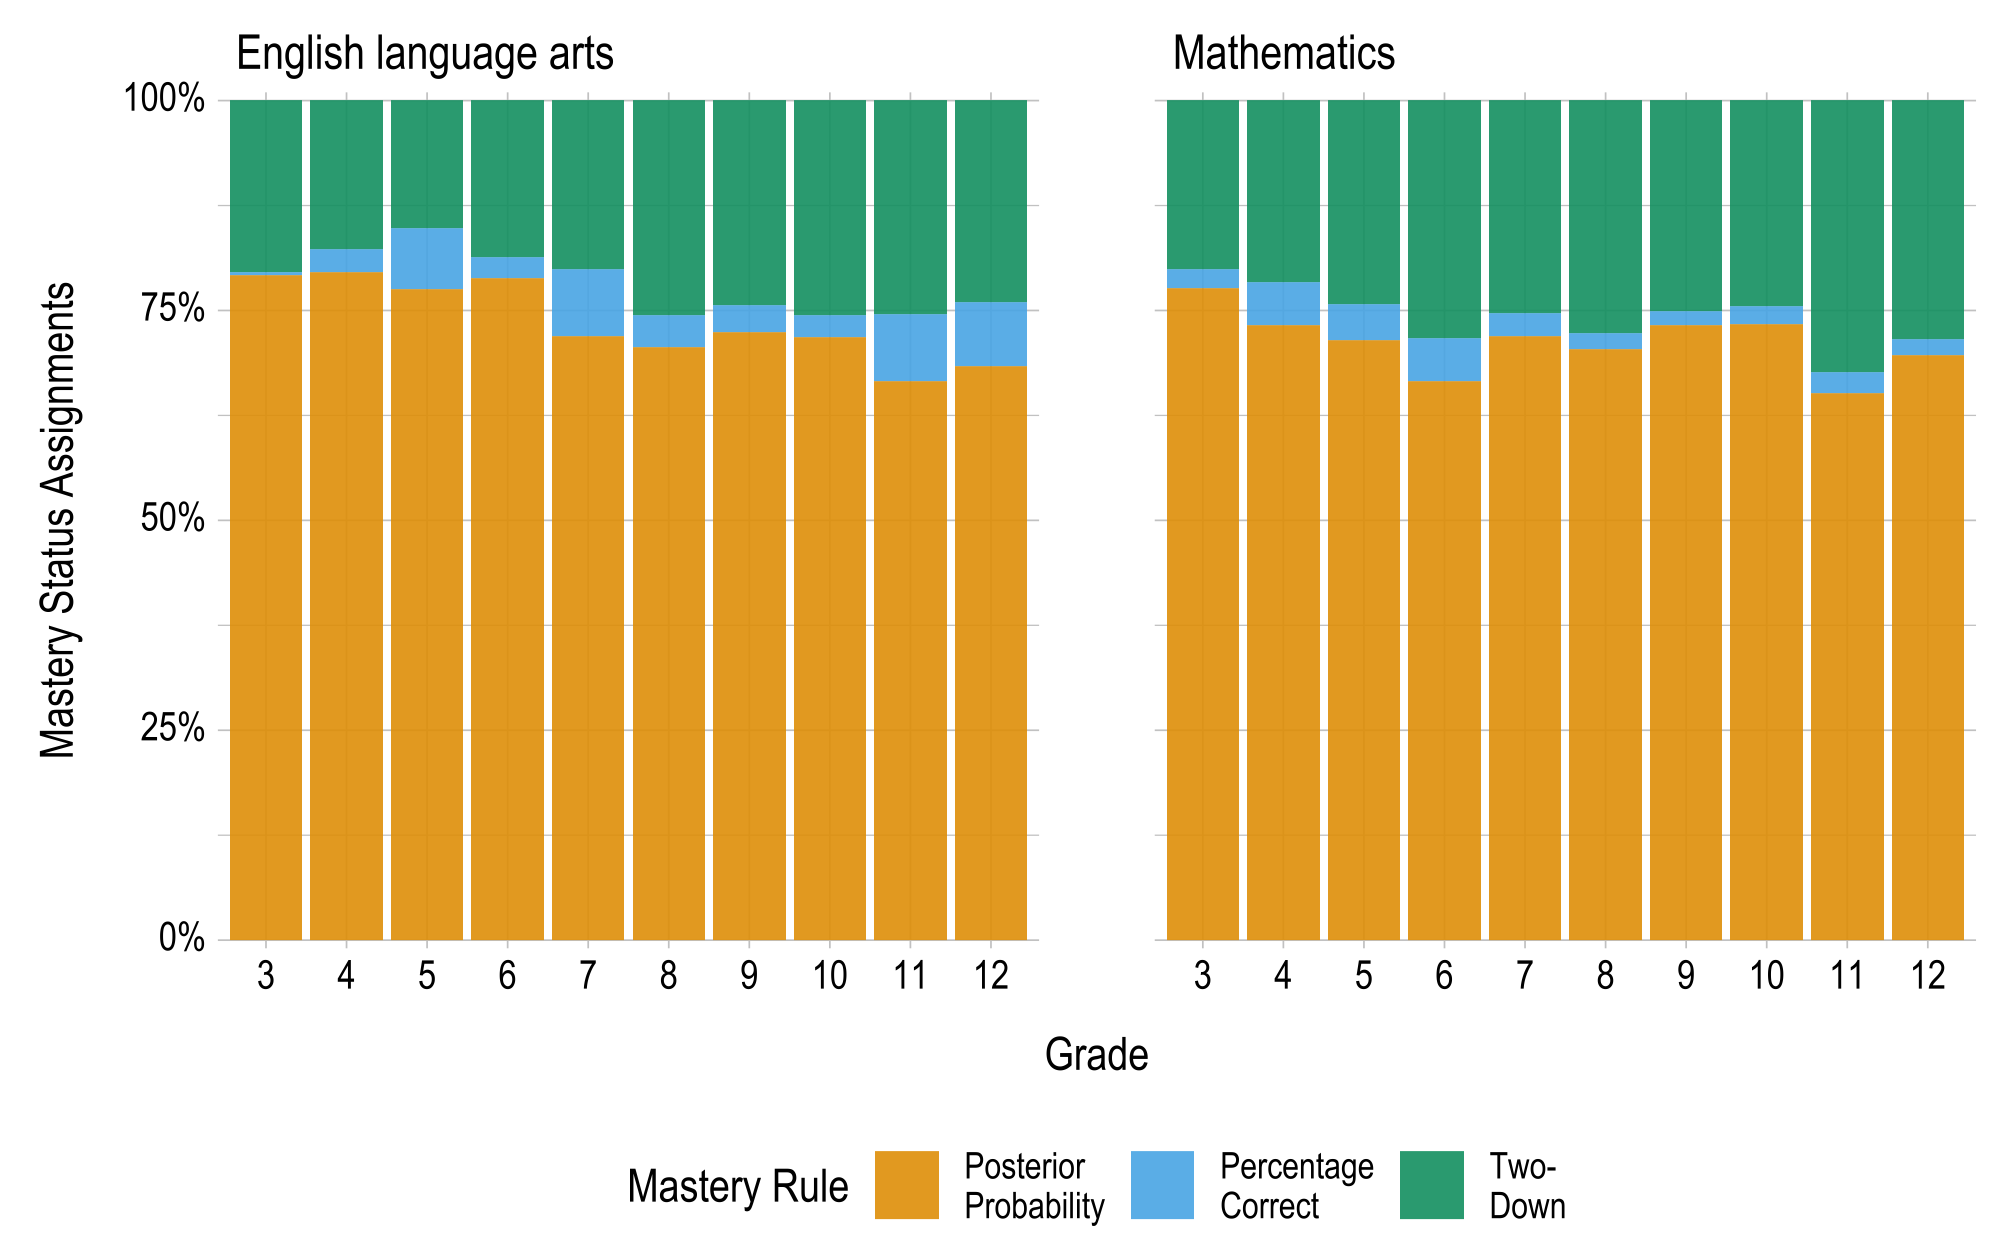 Two sets of stacked bar charts for ELA and mathematics. There is a bar chart for each grade, and the stacks within each bar chart represent a mastery rule and the percentage of mastery statuses obtained by each scoring rule. The highest percentage of linkage level mastery assignment across all grades is for the posterior probability mastery rule.